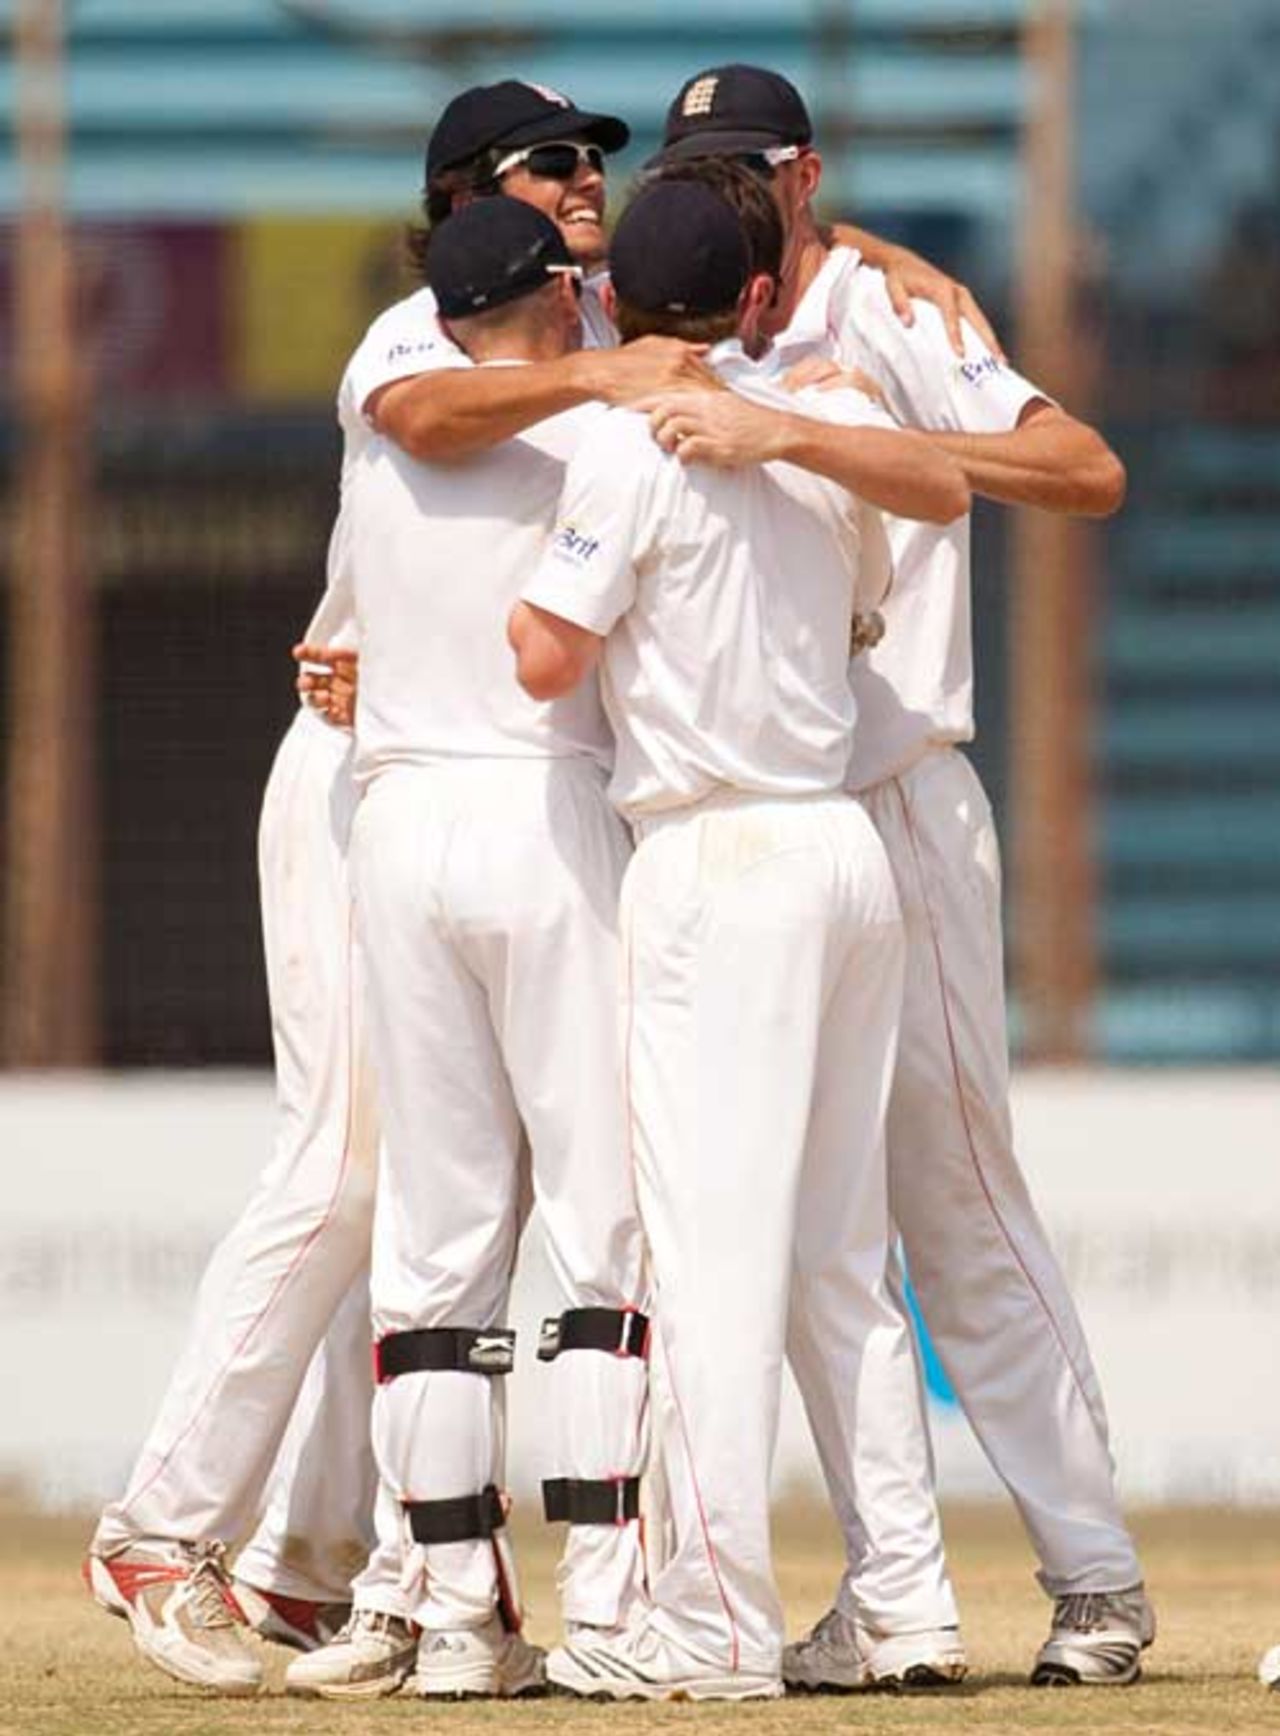 England huddle around Graeme Swann after the final wicket falls, Bangladesh v England, 1st Test, Chittagong, March 16, 2010